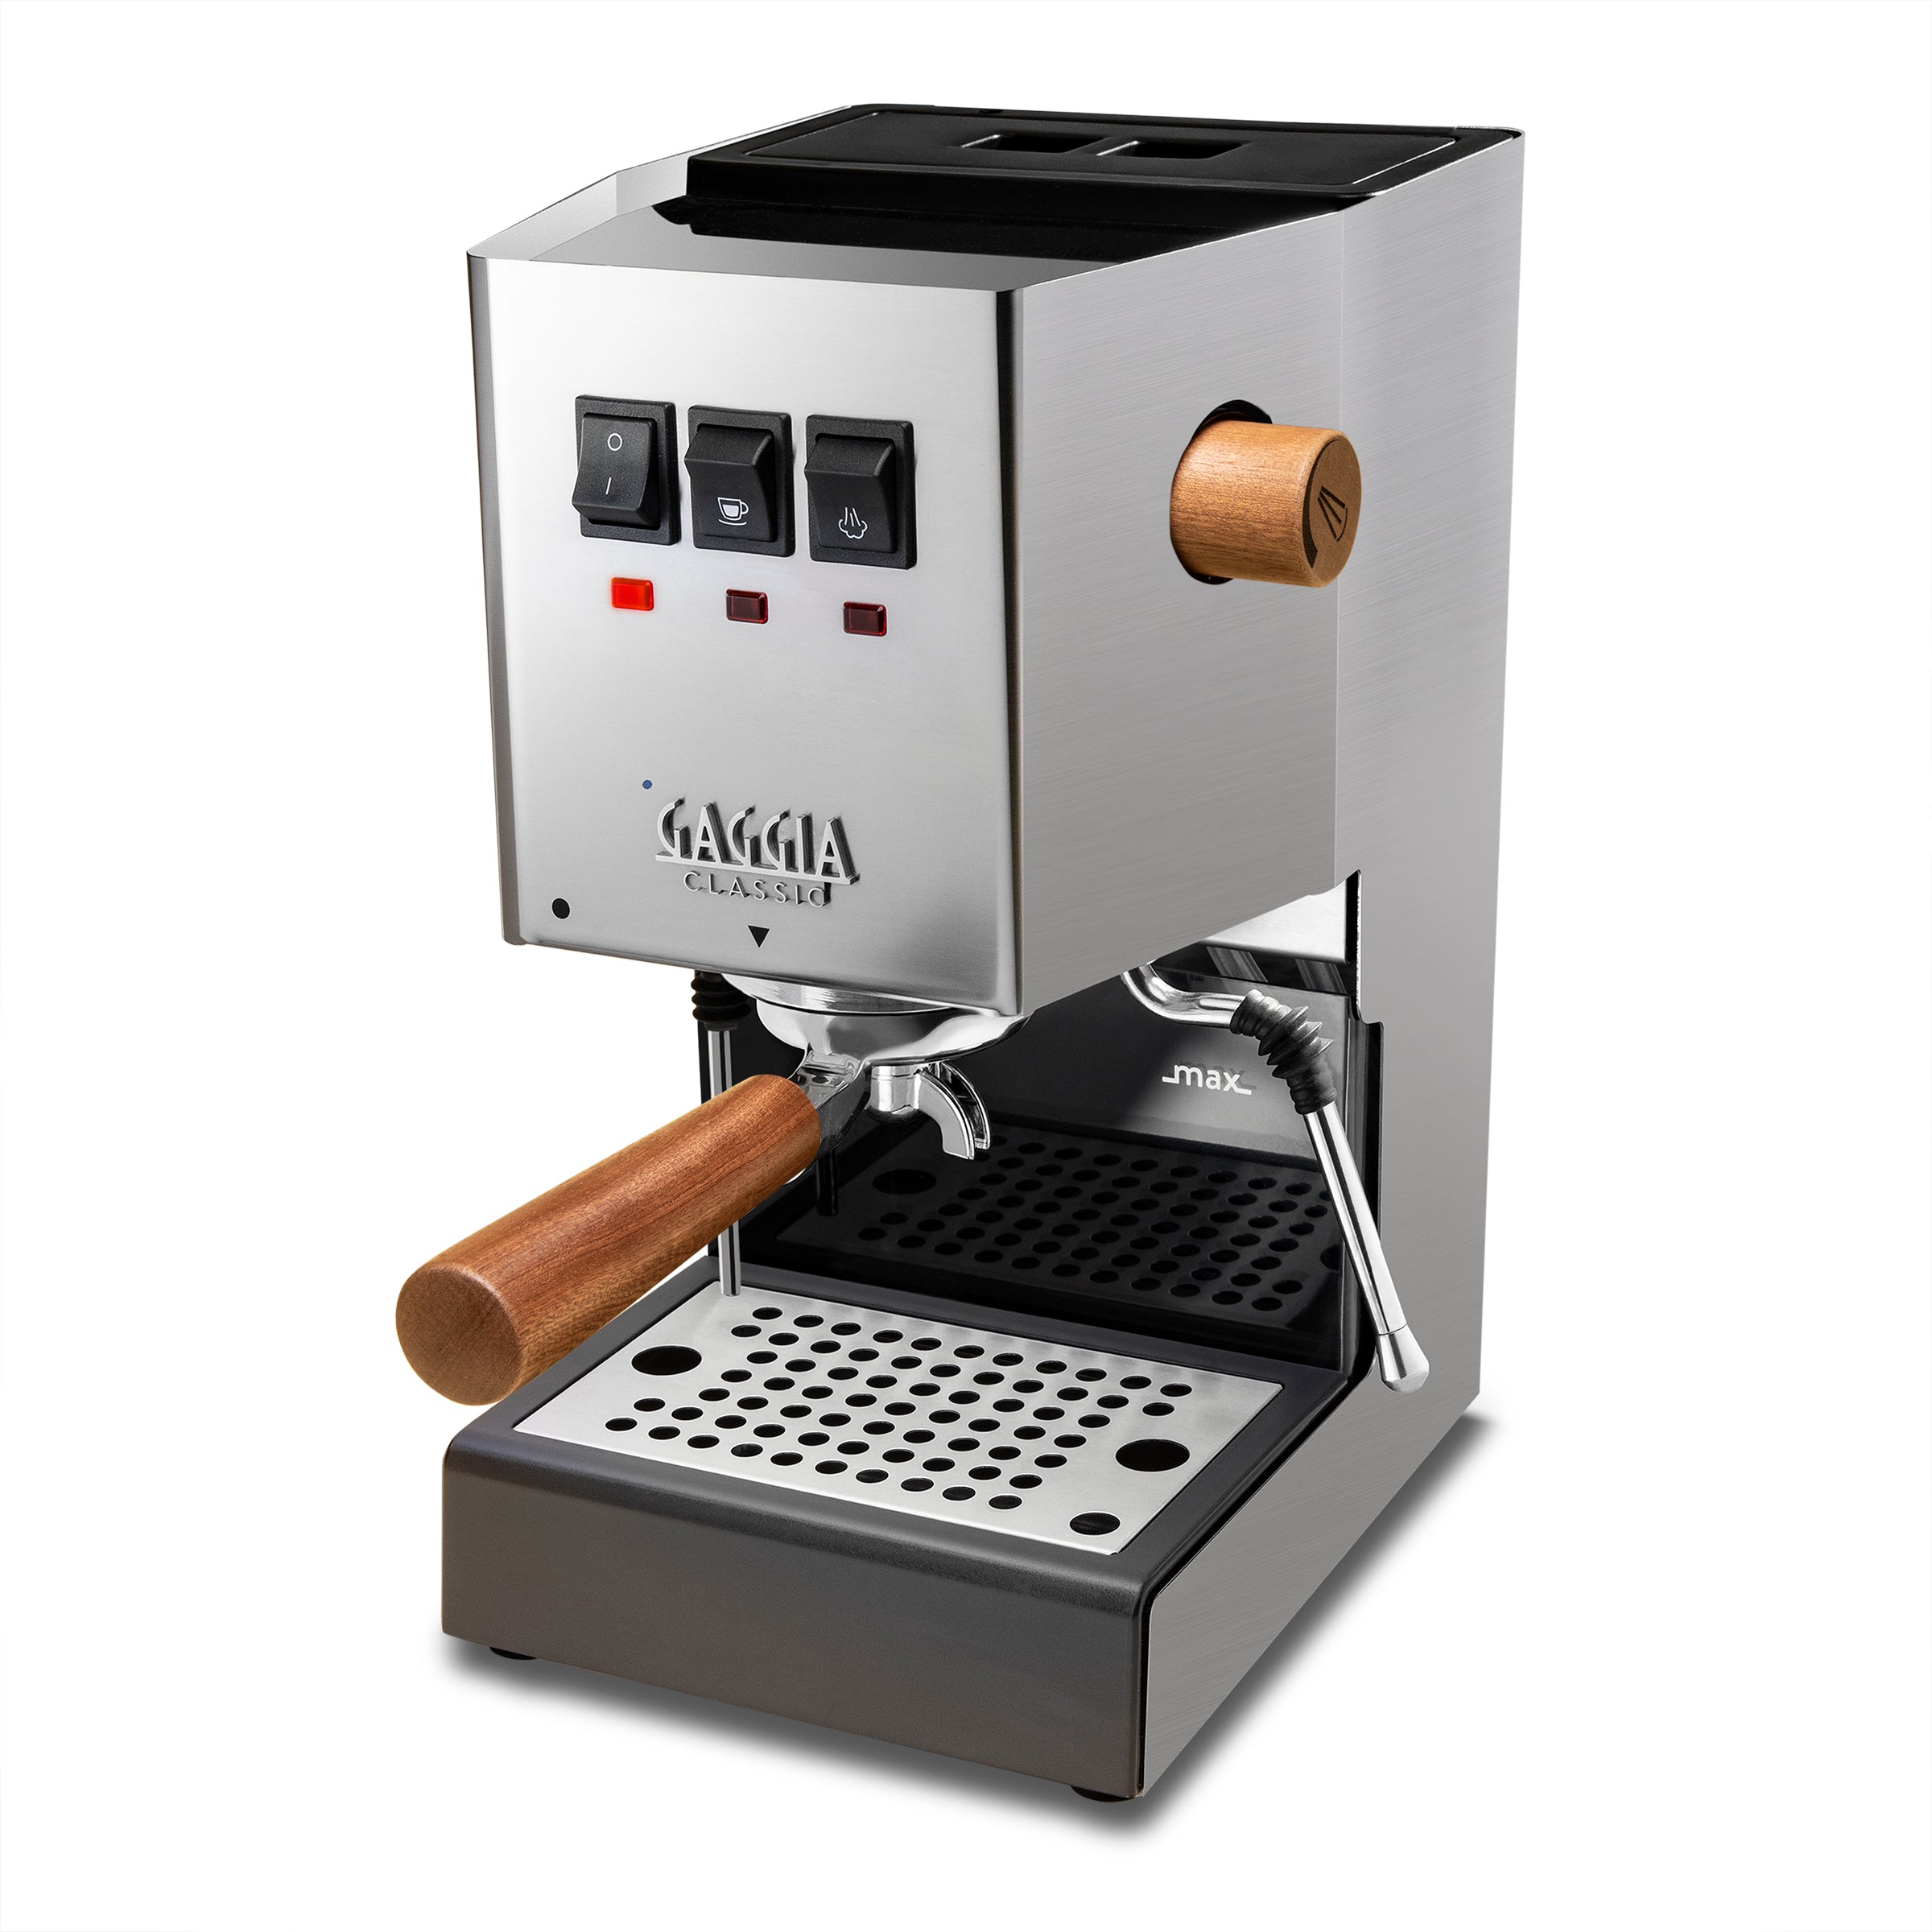 Gaggia Classic Pro in Stainless Steel - Sapele